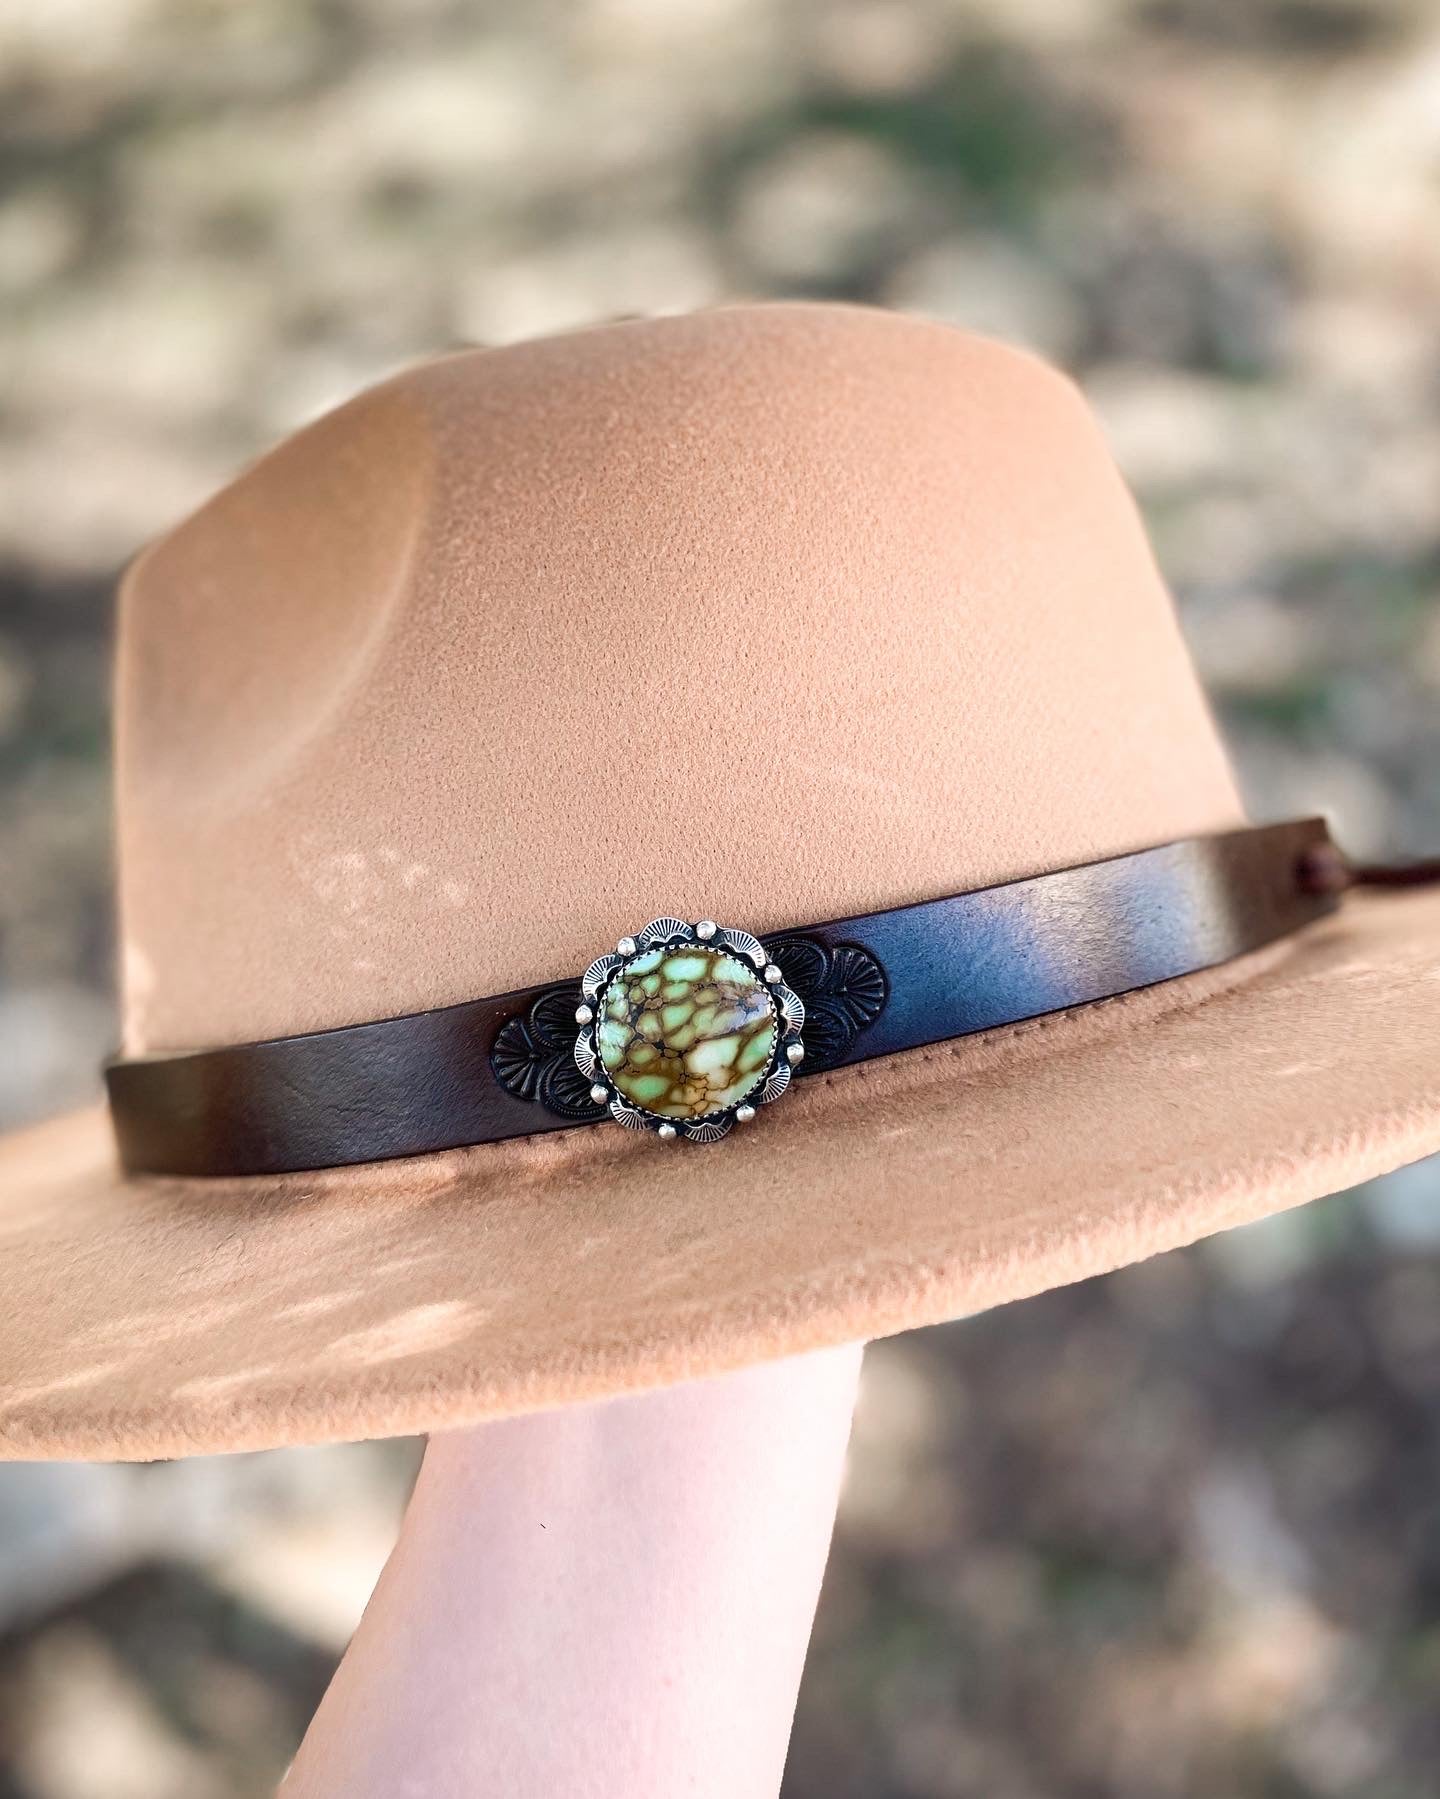 Tan hat with dark leather hatband with stamped design featuring round turquoise hat pin set in sterling silver.